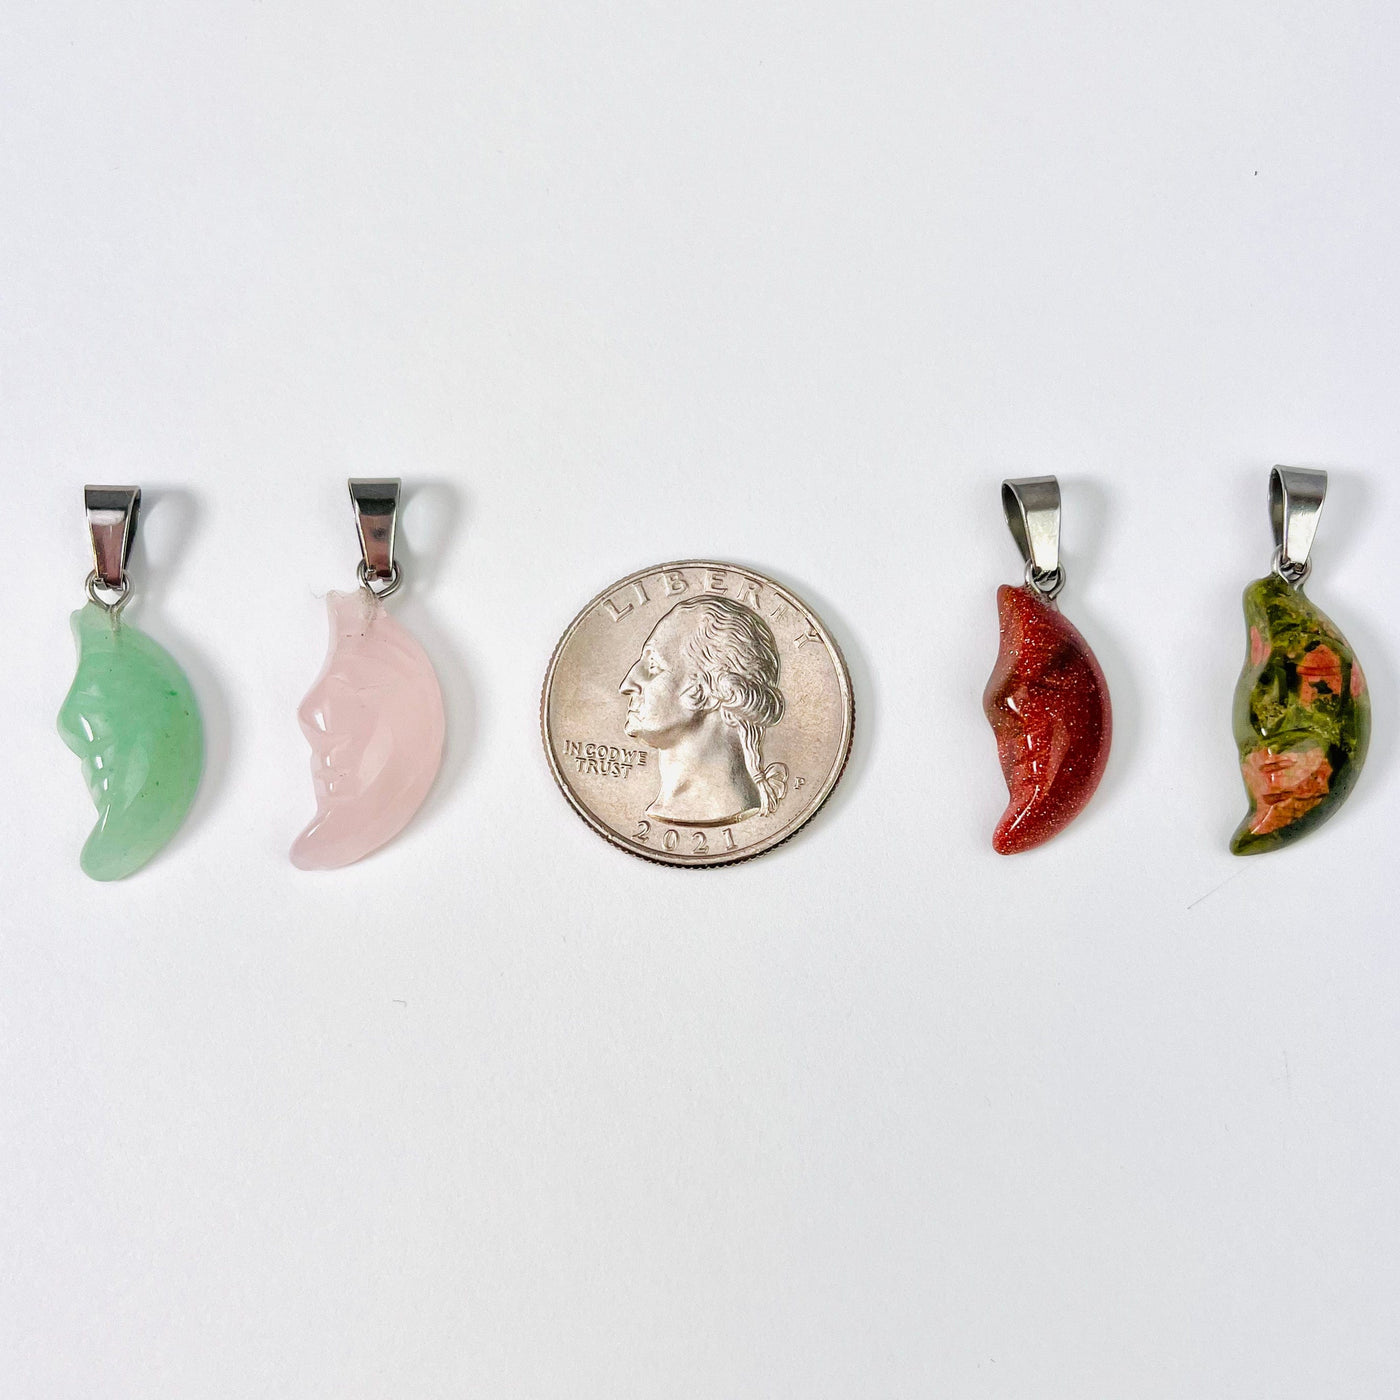 Four Crescent Moon Gemstone Pendants in a line with a quarter in the middle for size reference.